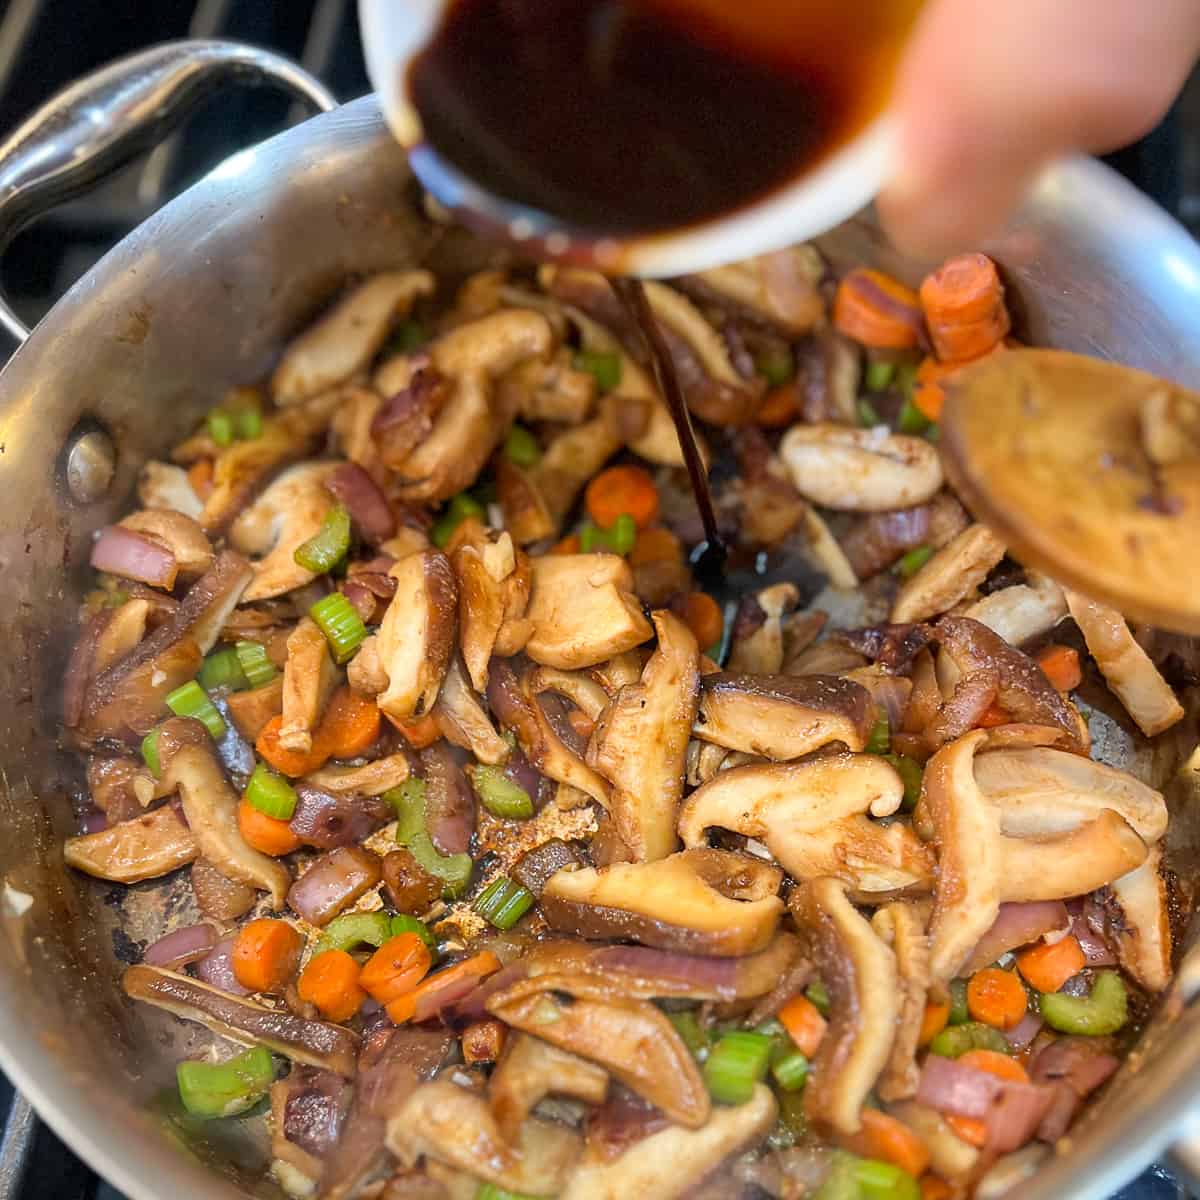 top side view of coconut aminos being added to a sauce pan with cooked mushrooms and veggies